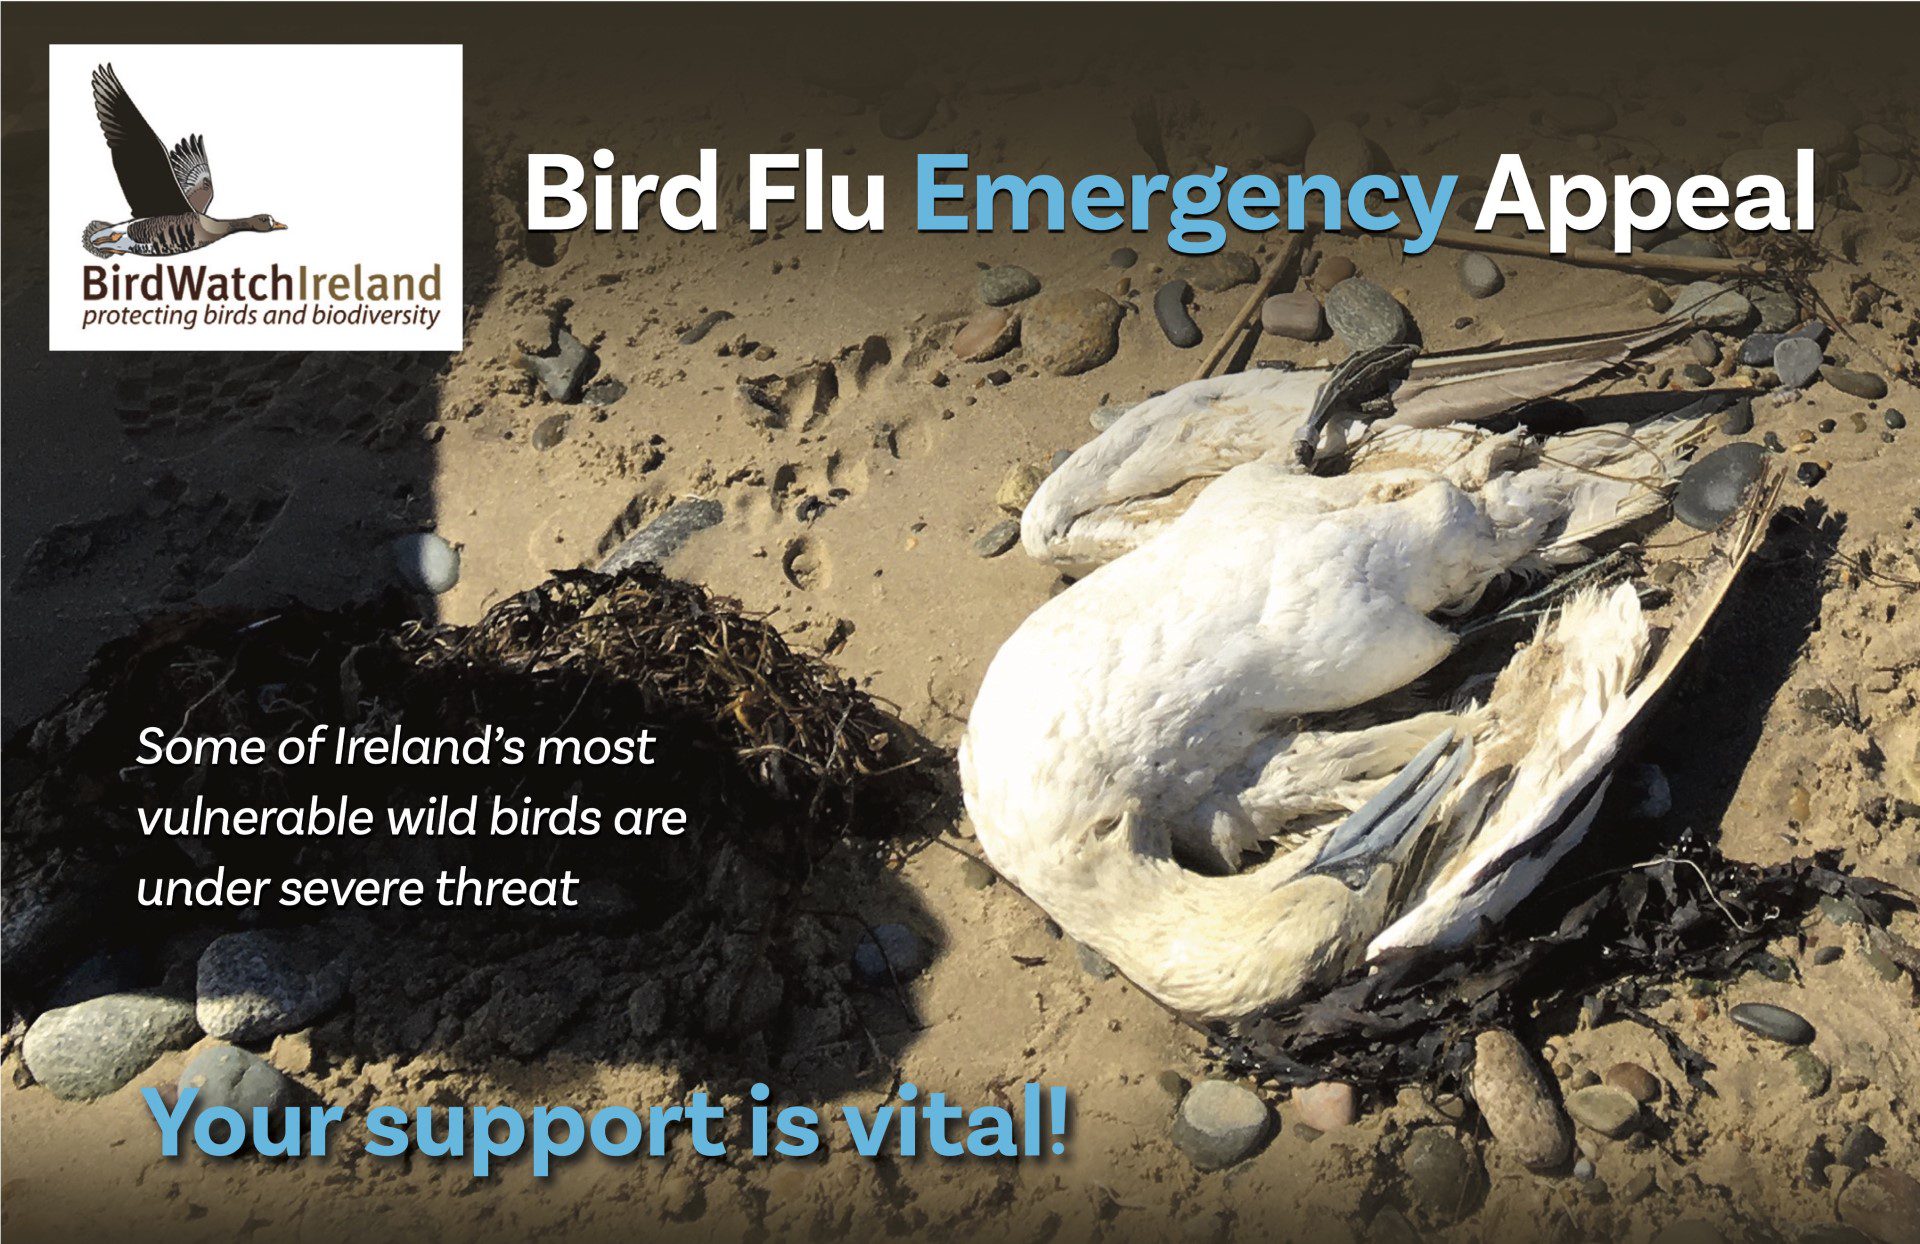 Some of Ireland's most vulnerable wild birds are under severe threat